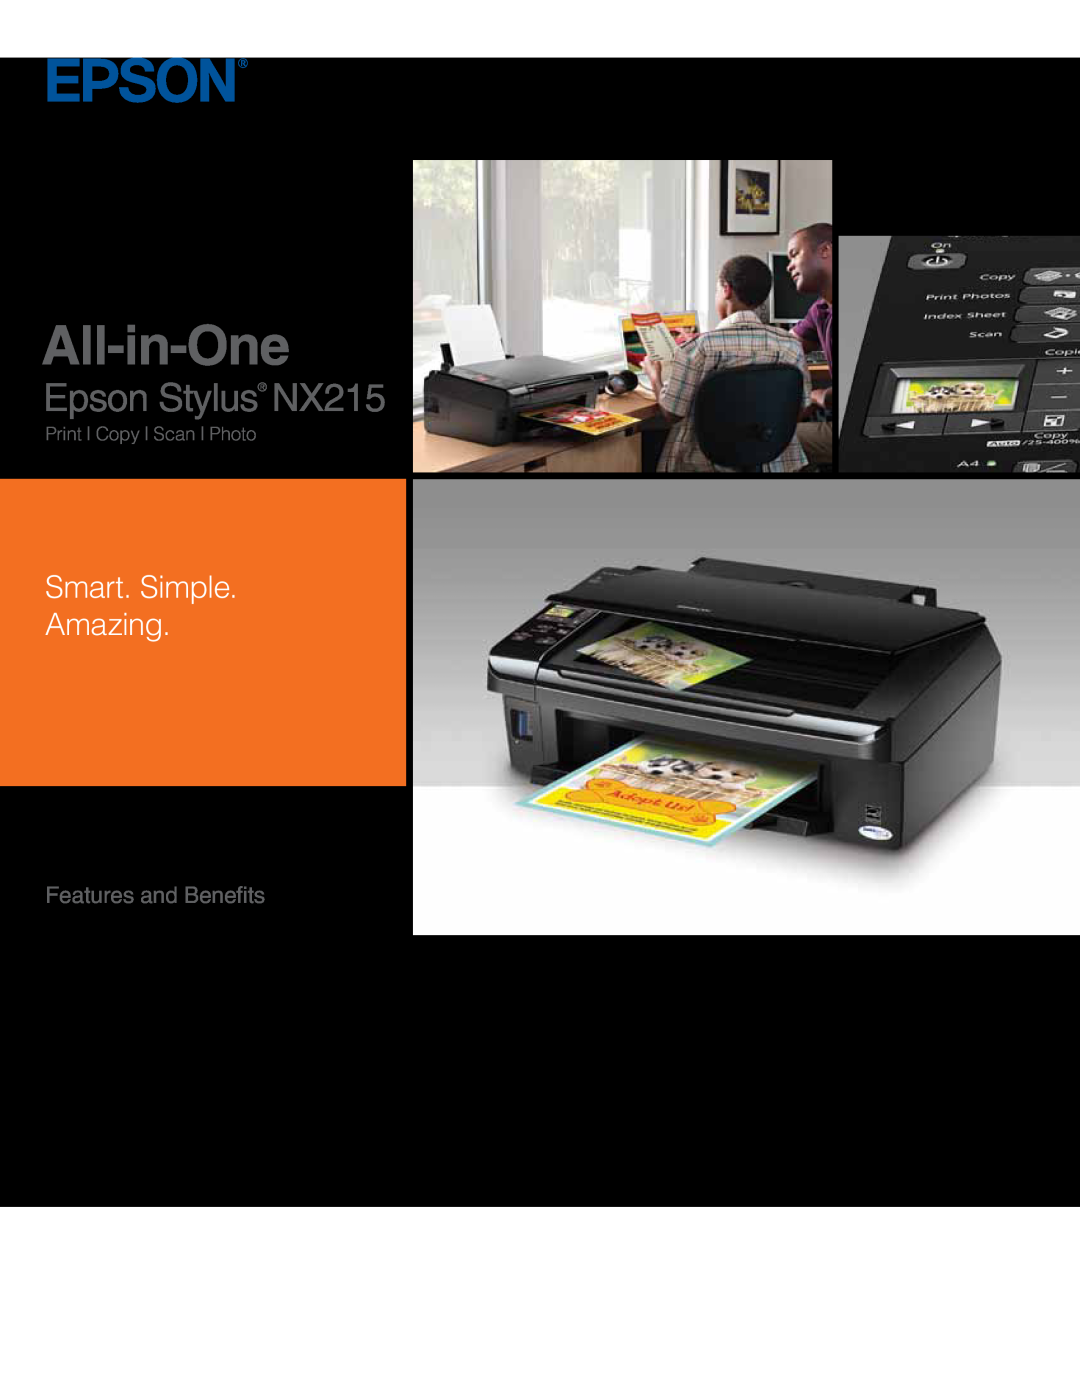 Epson manual All-in-One, Epson Stylus NX215, Smart. Simple Amazing, Features and Benefits, Print Copy Scan Photo 